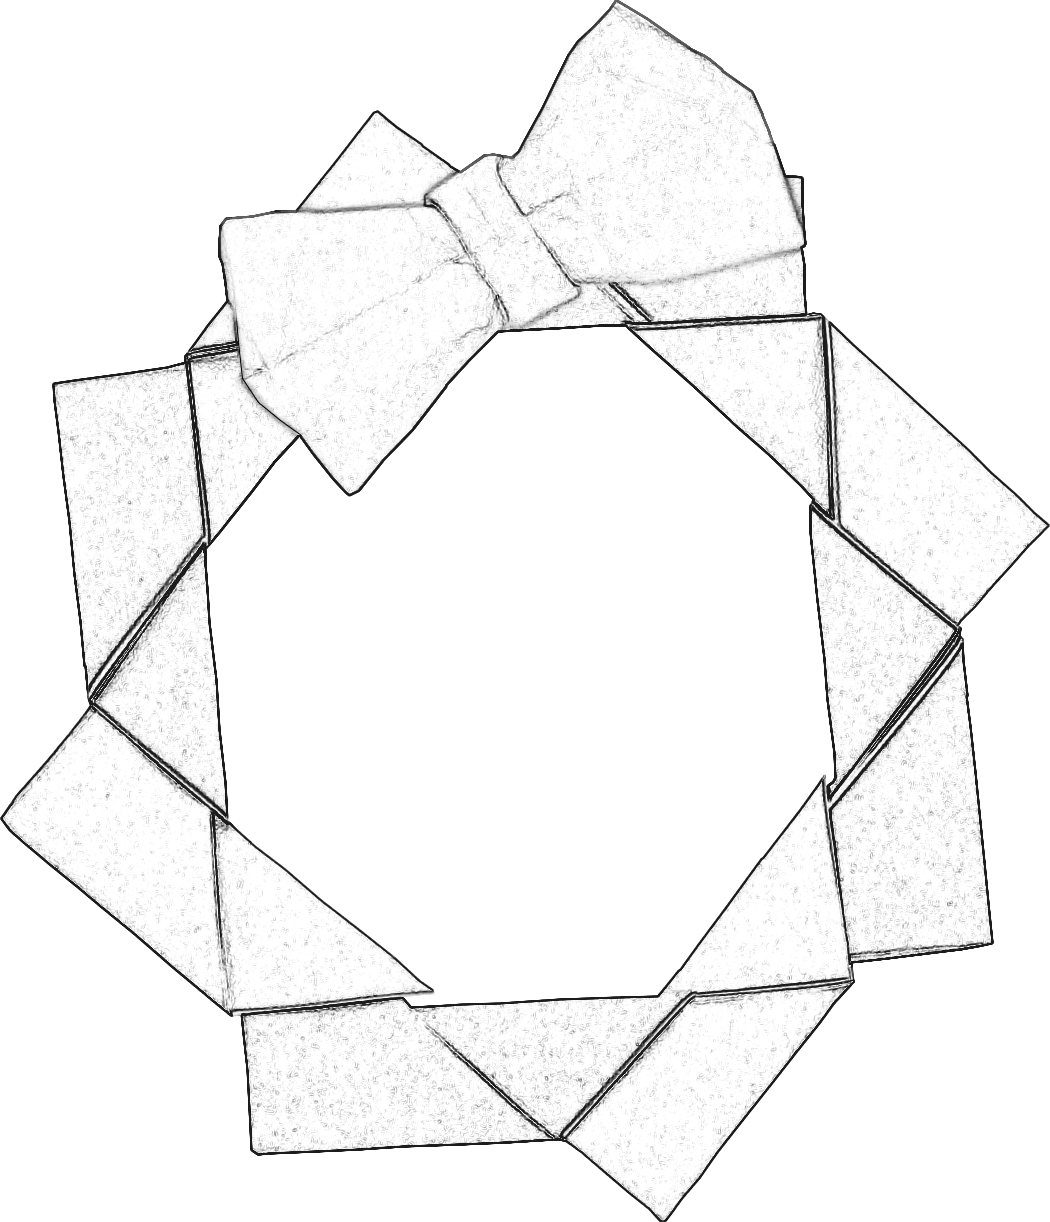 colouring picture of an origami modular wreath with bow